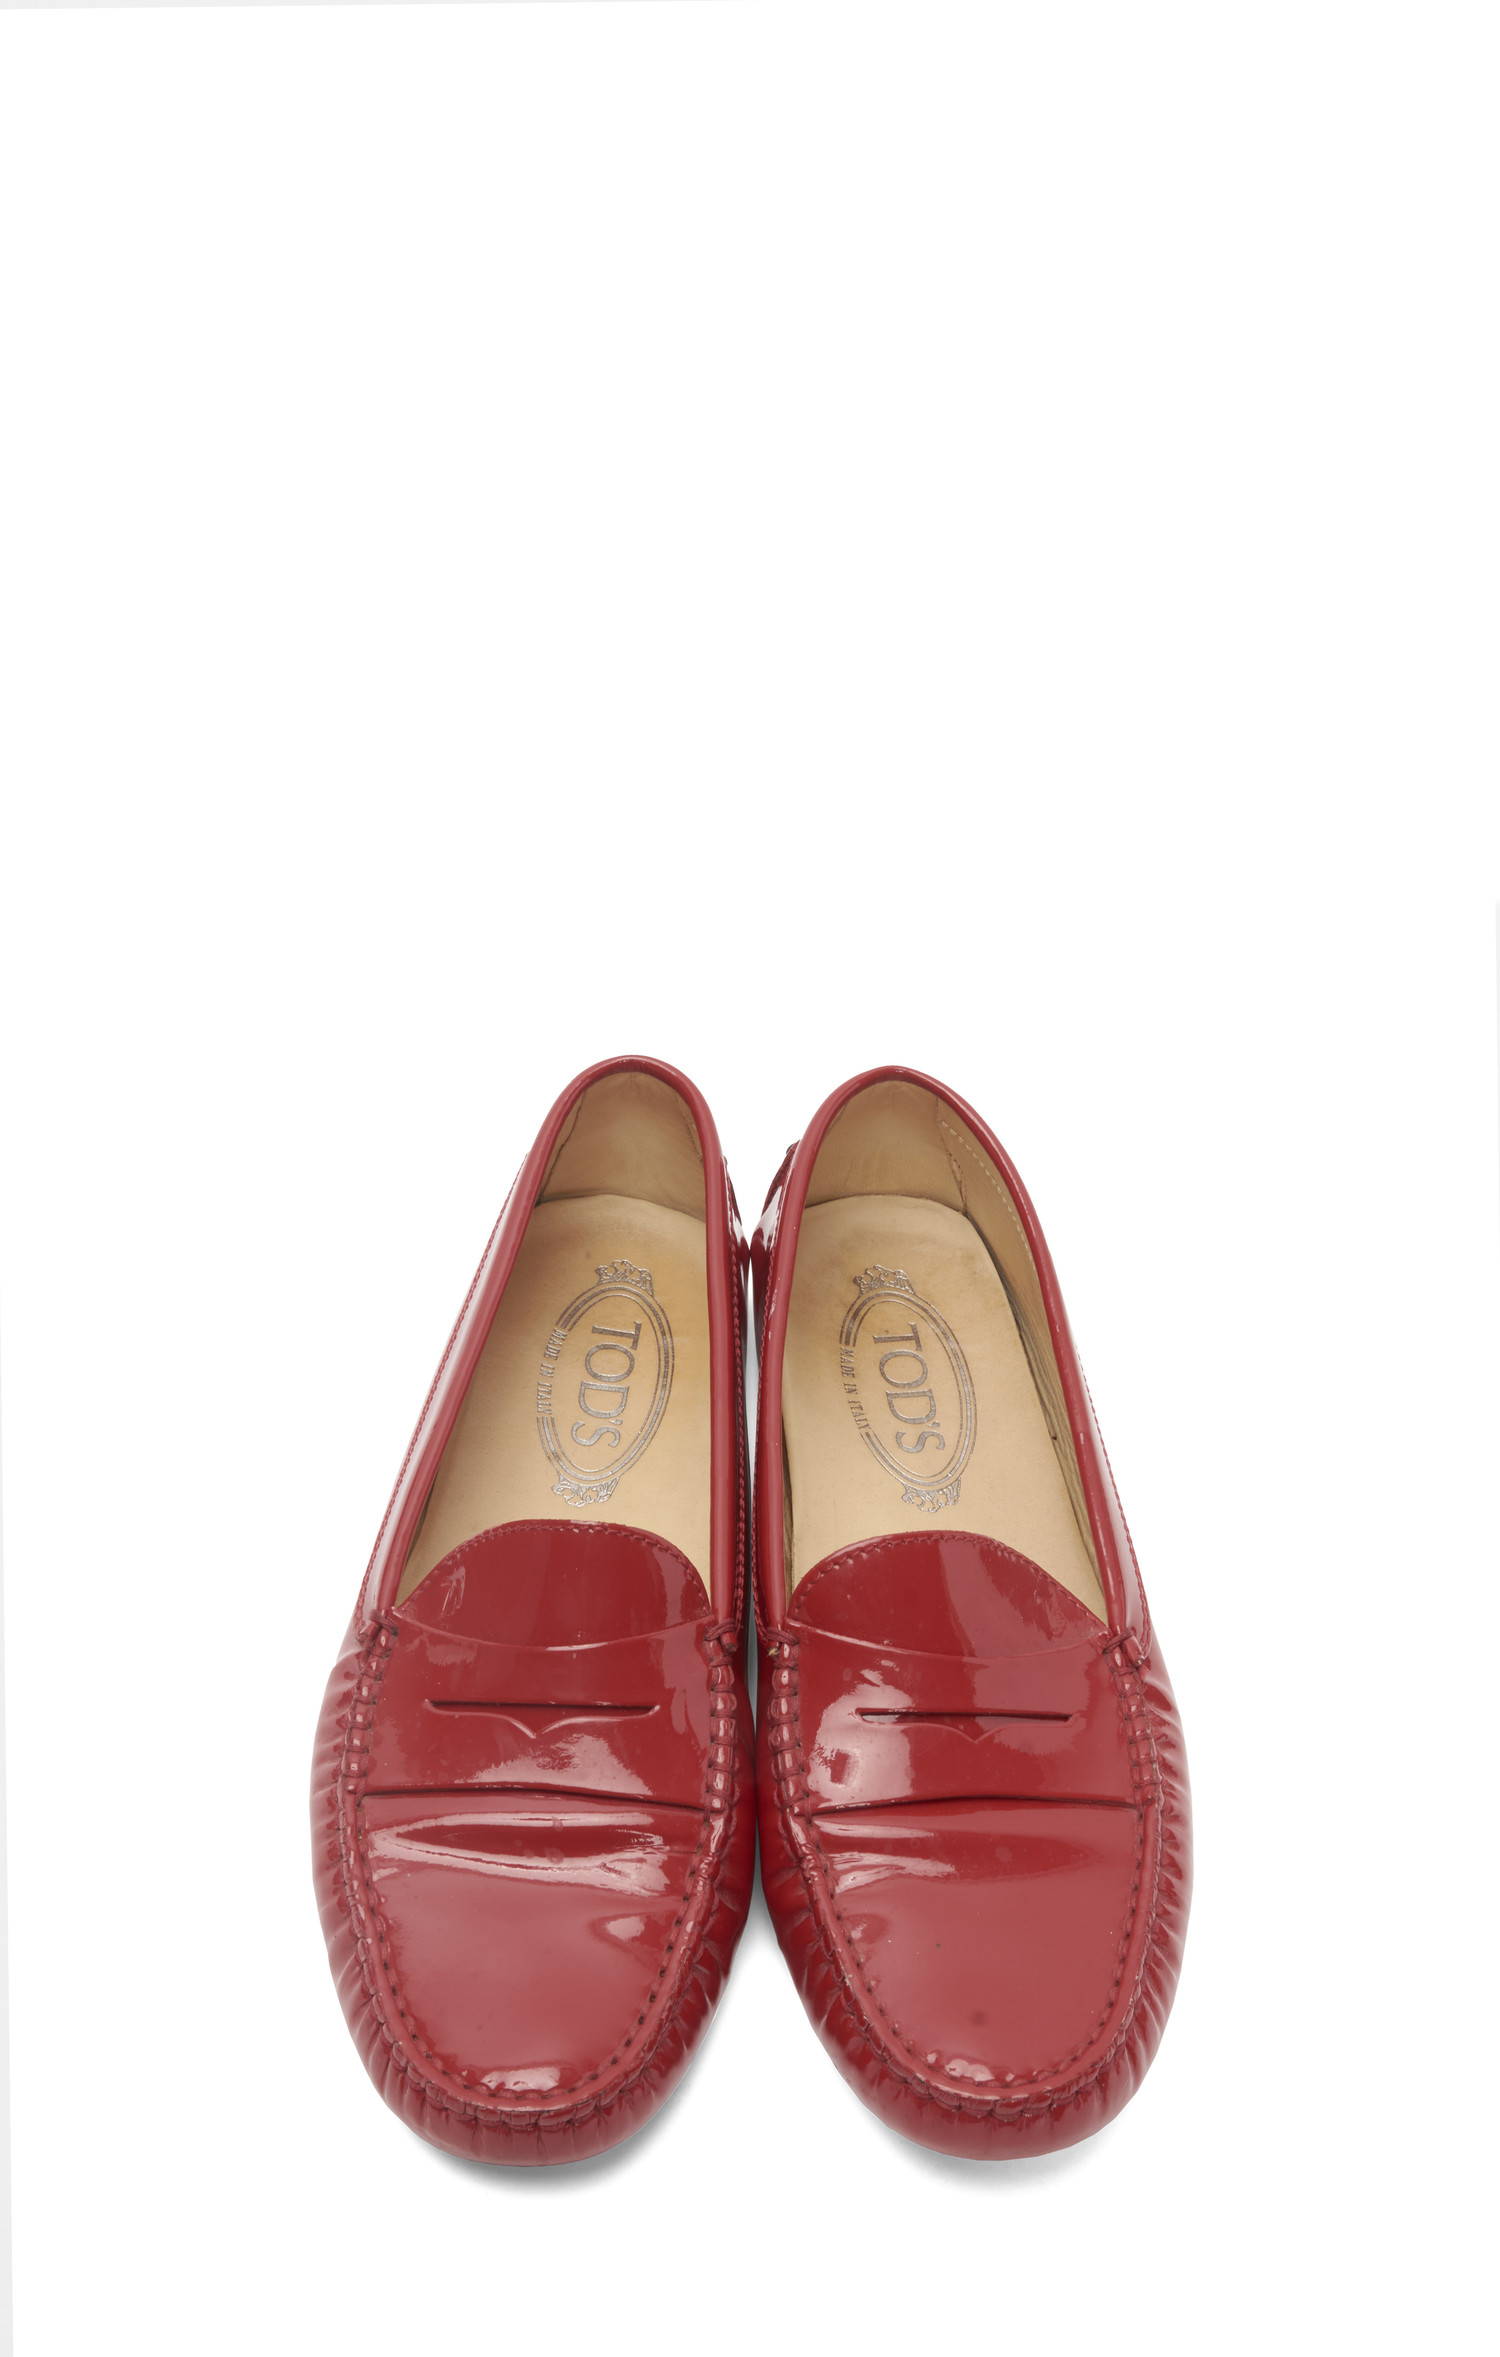 Red Patent Gommino Loafers - 38.5 - RETYCHE